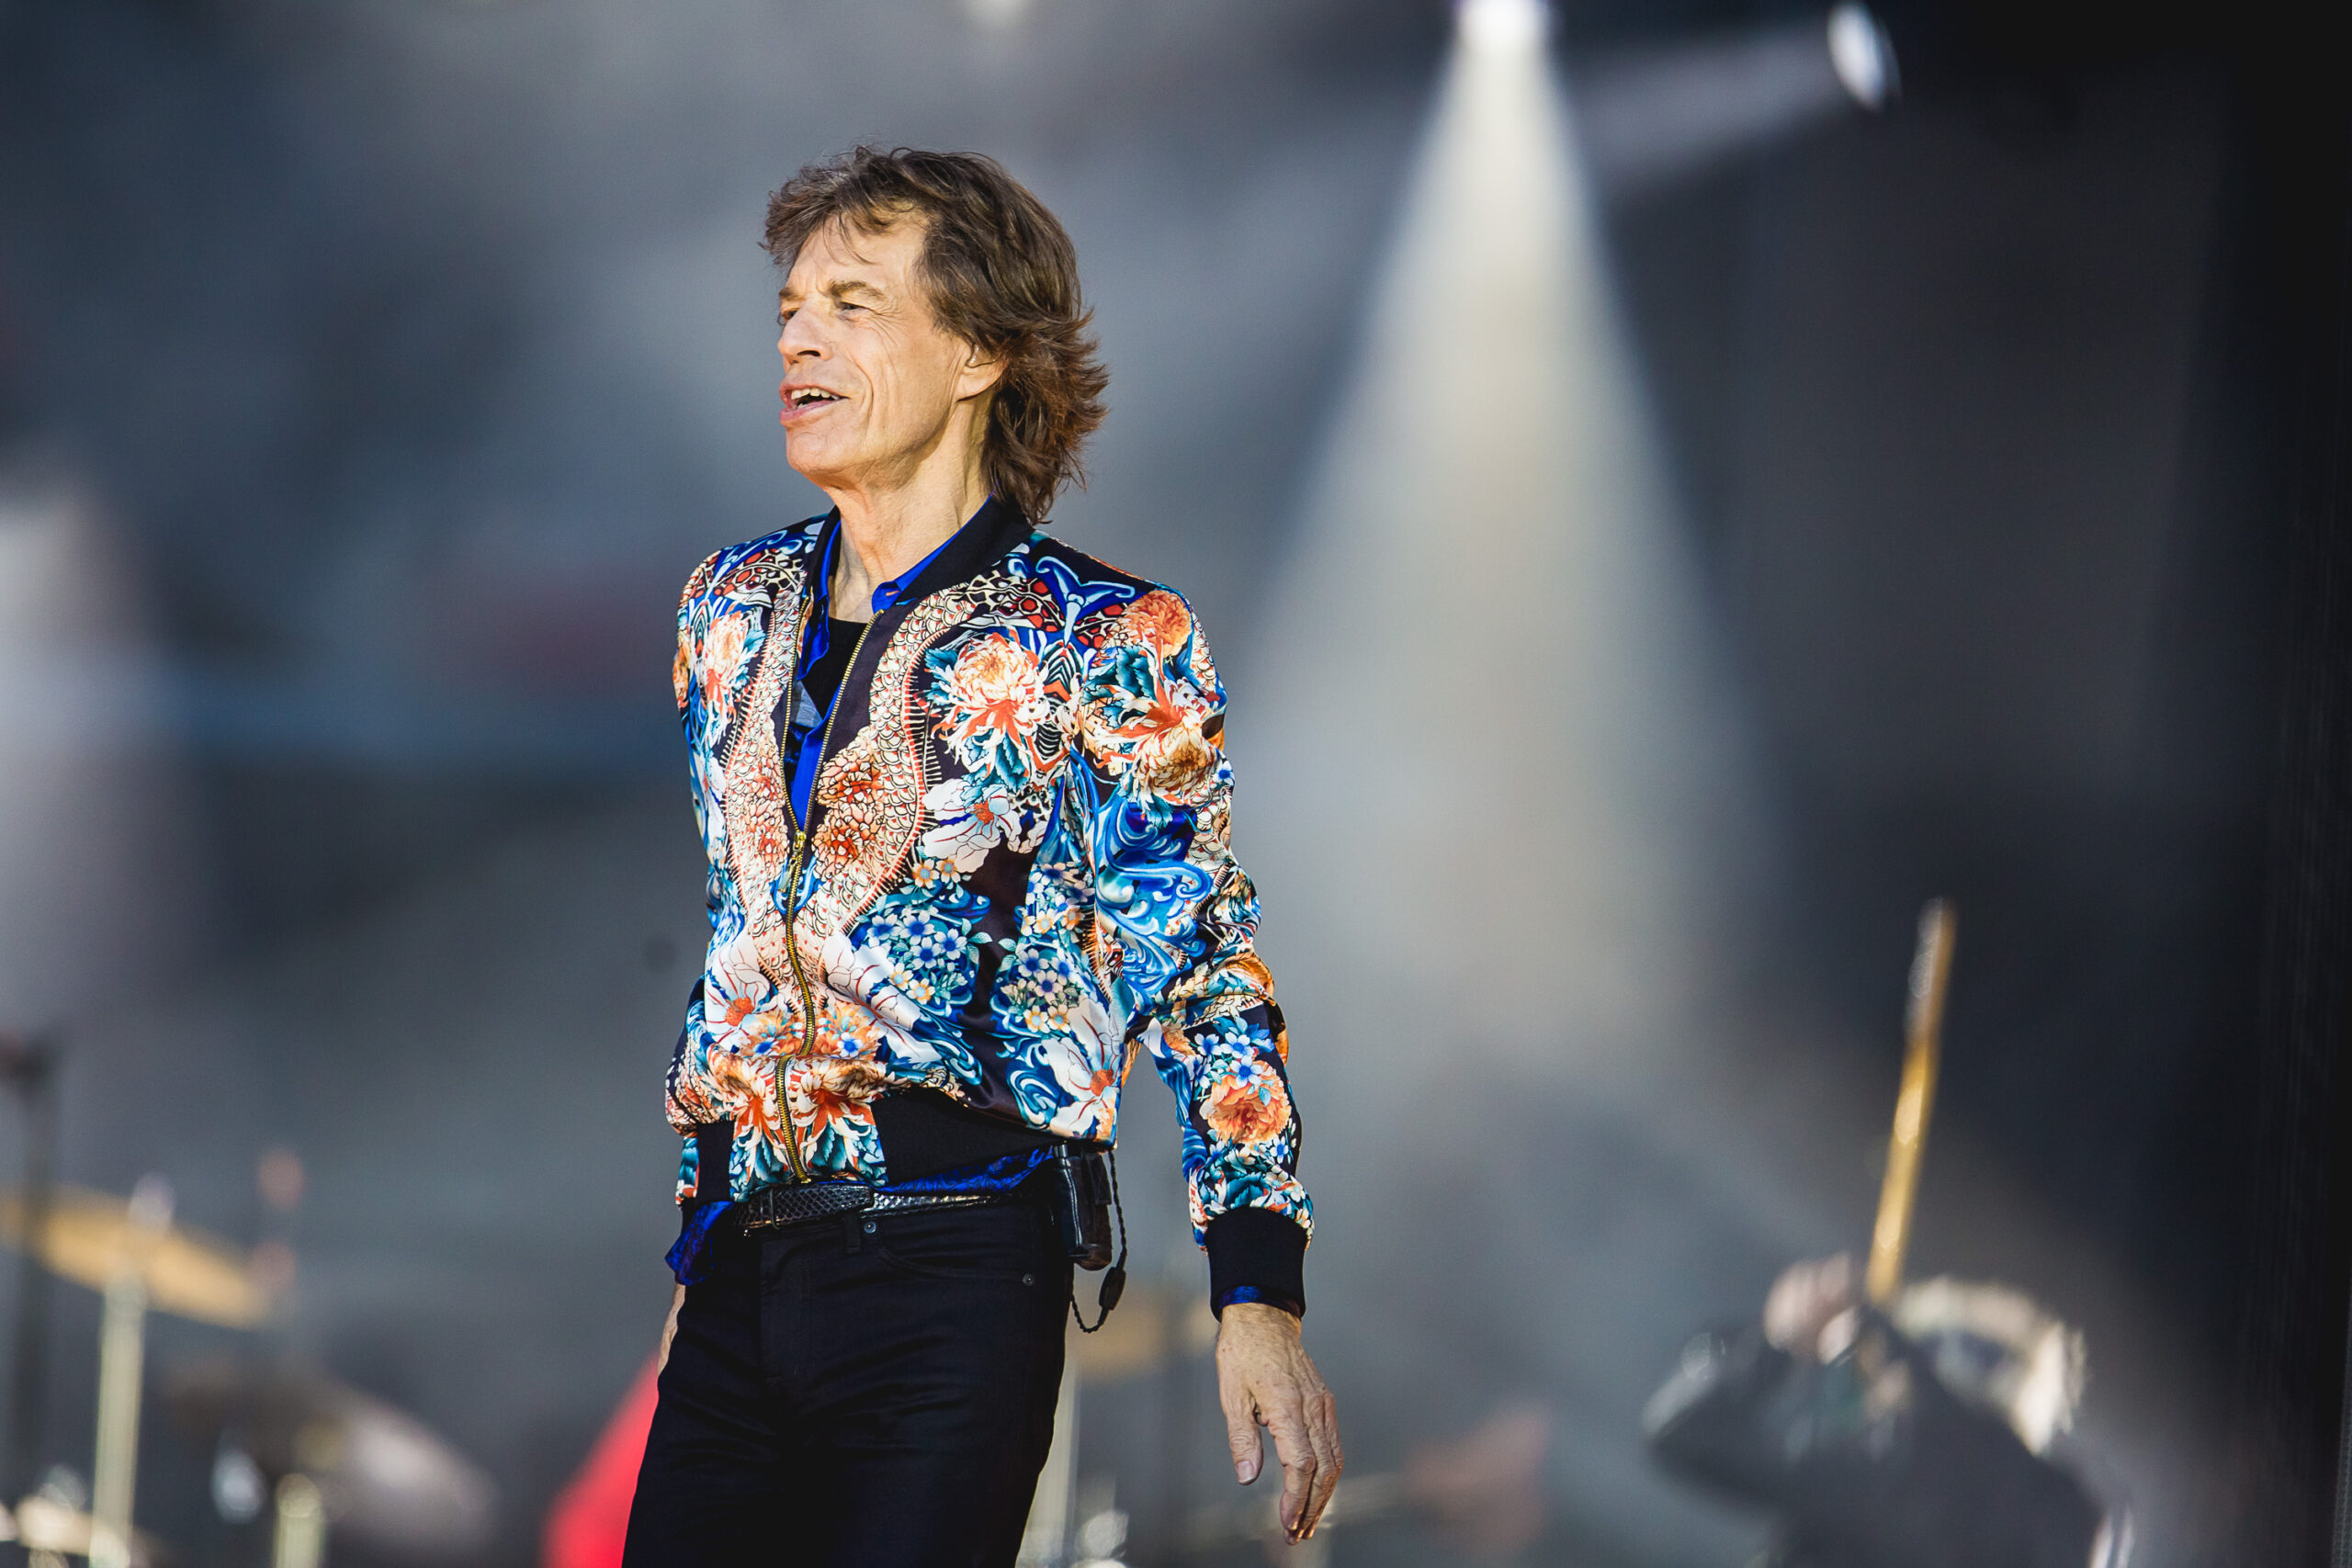 the rolling stones in concert at old trafford, manchester, uk 05 jun 2018